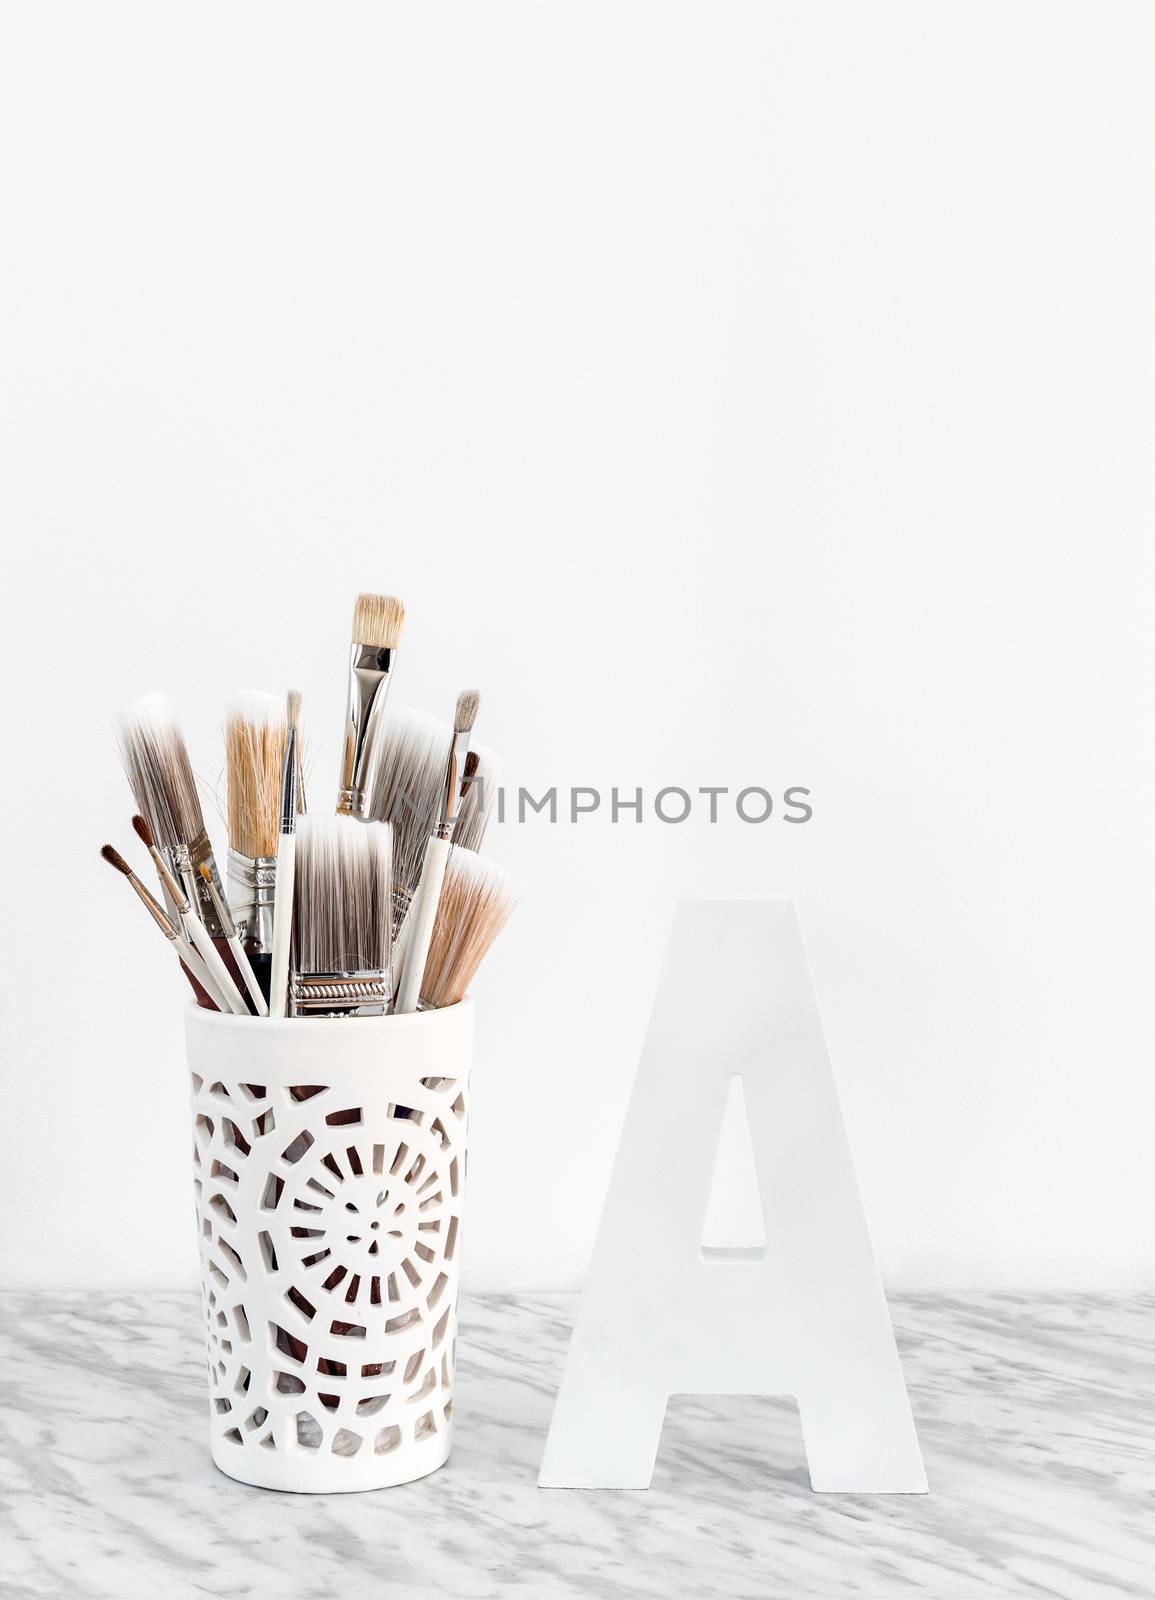 Paintbrushes in a decorative vase and letter A on marble surface by anikasalsera